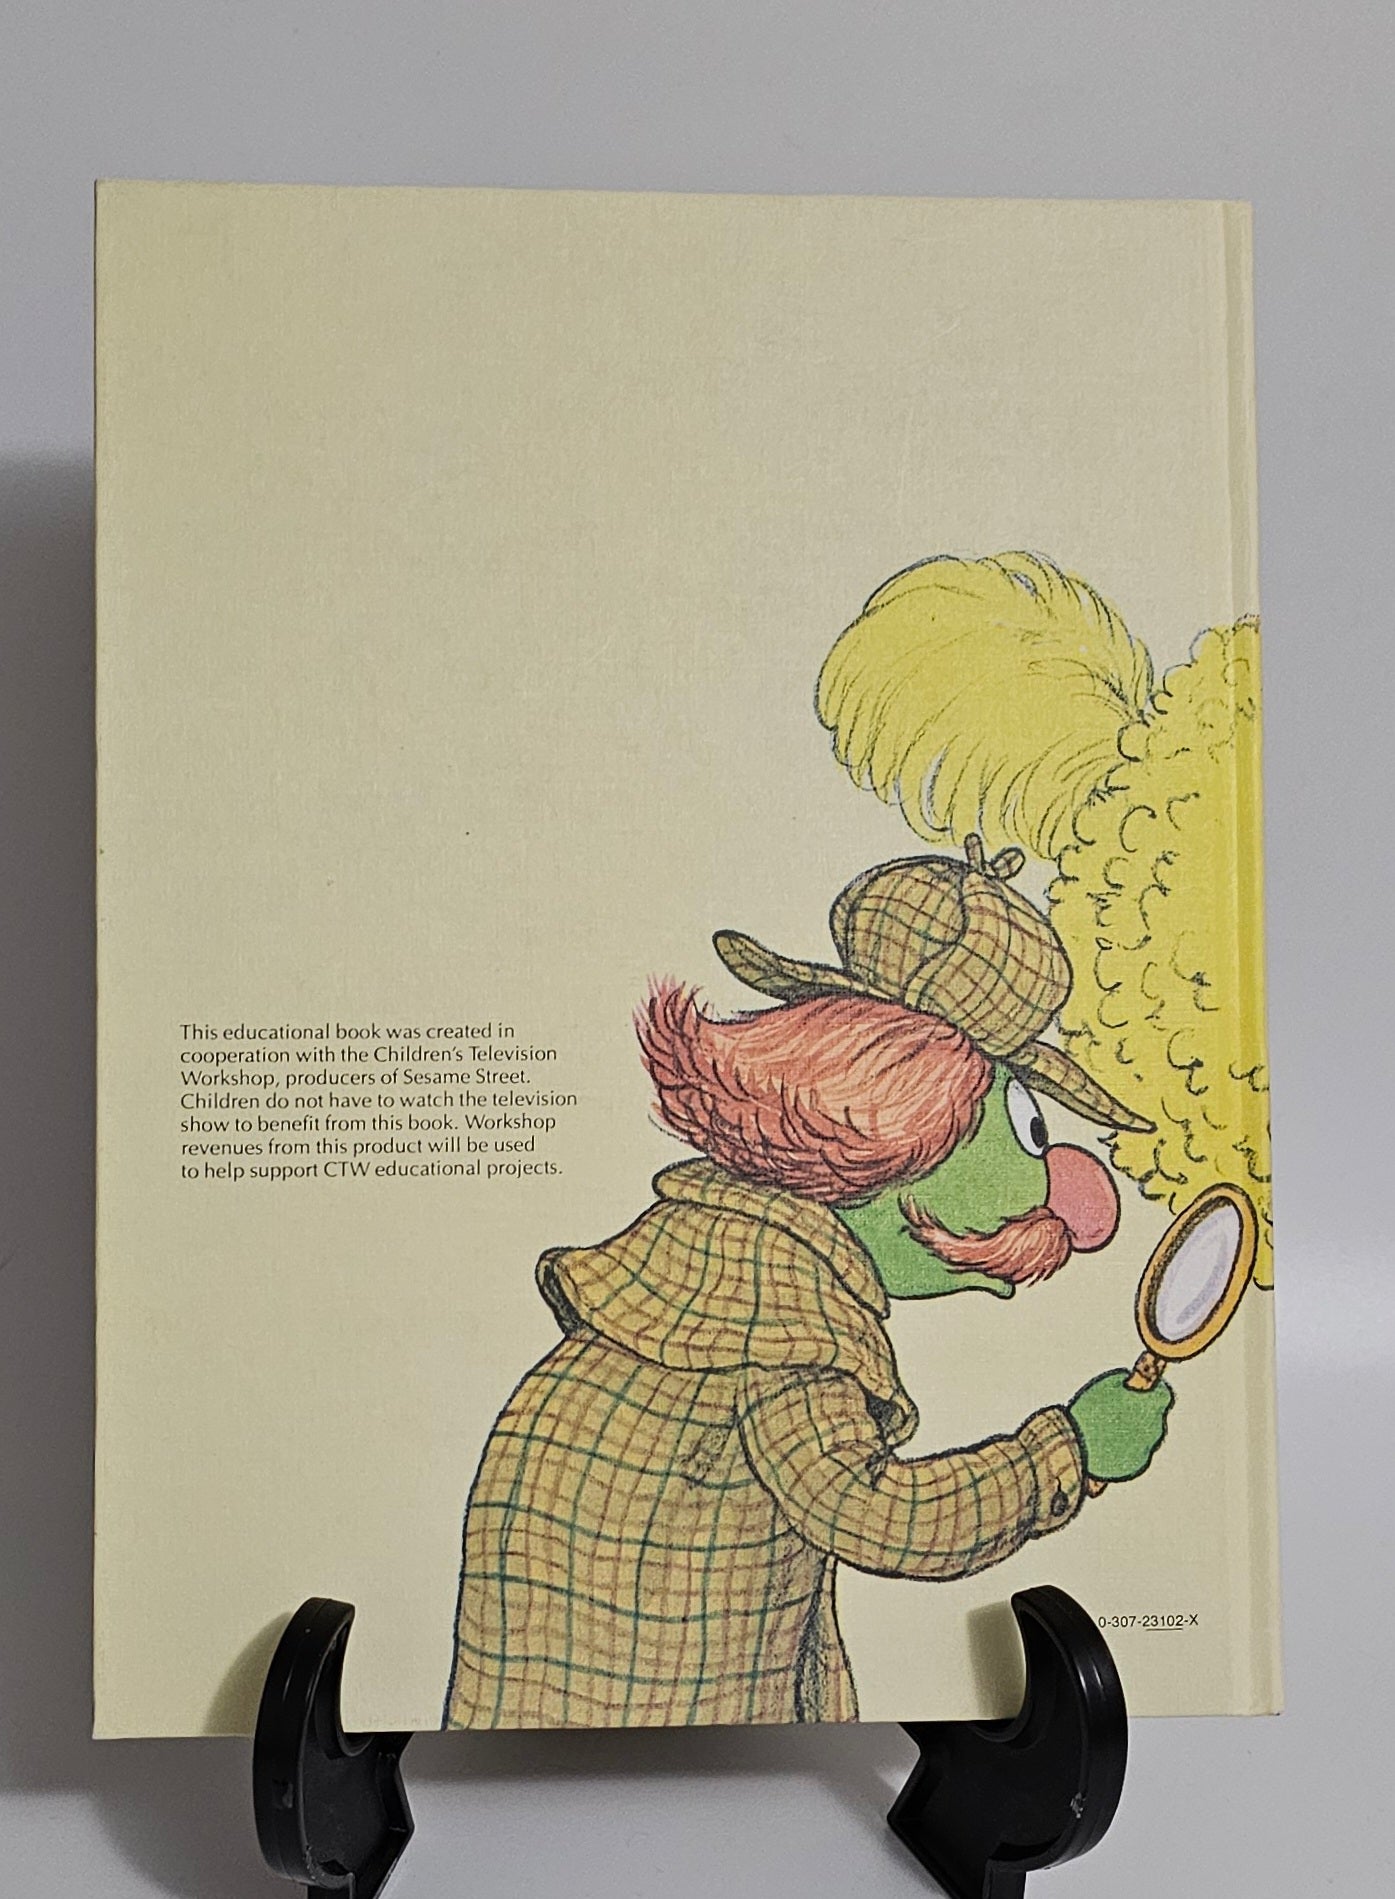 The Sesame Street Pet Show By: Emily Perl Kingsley Illustrated by Normand Chartier